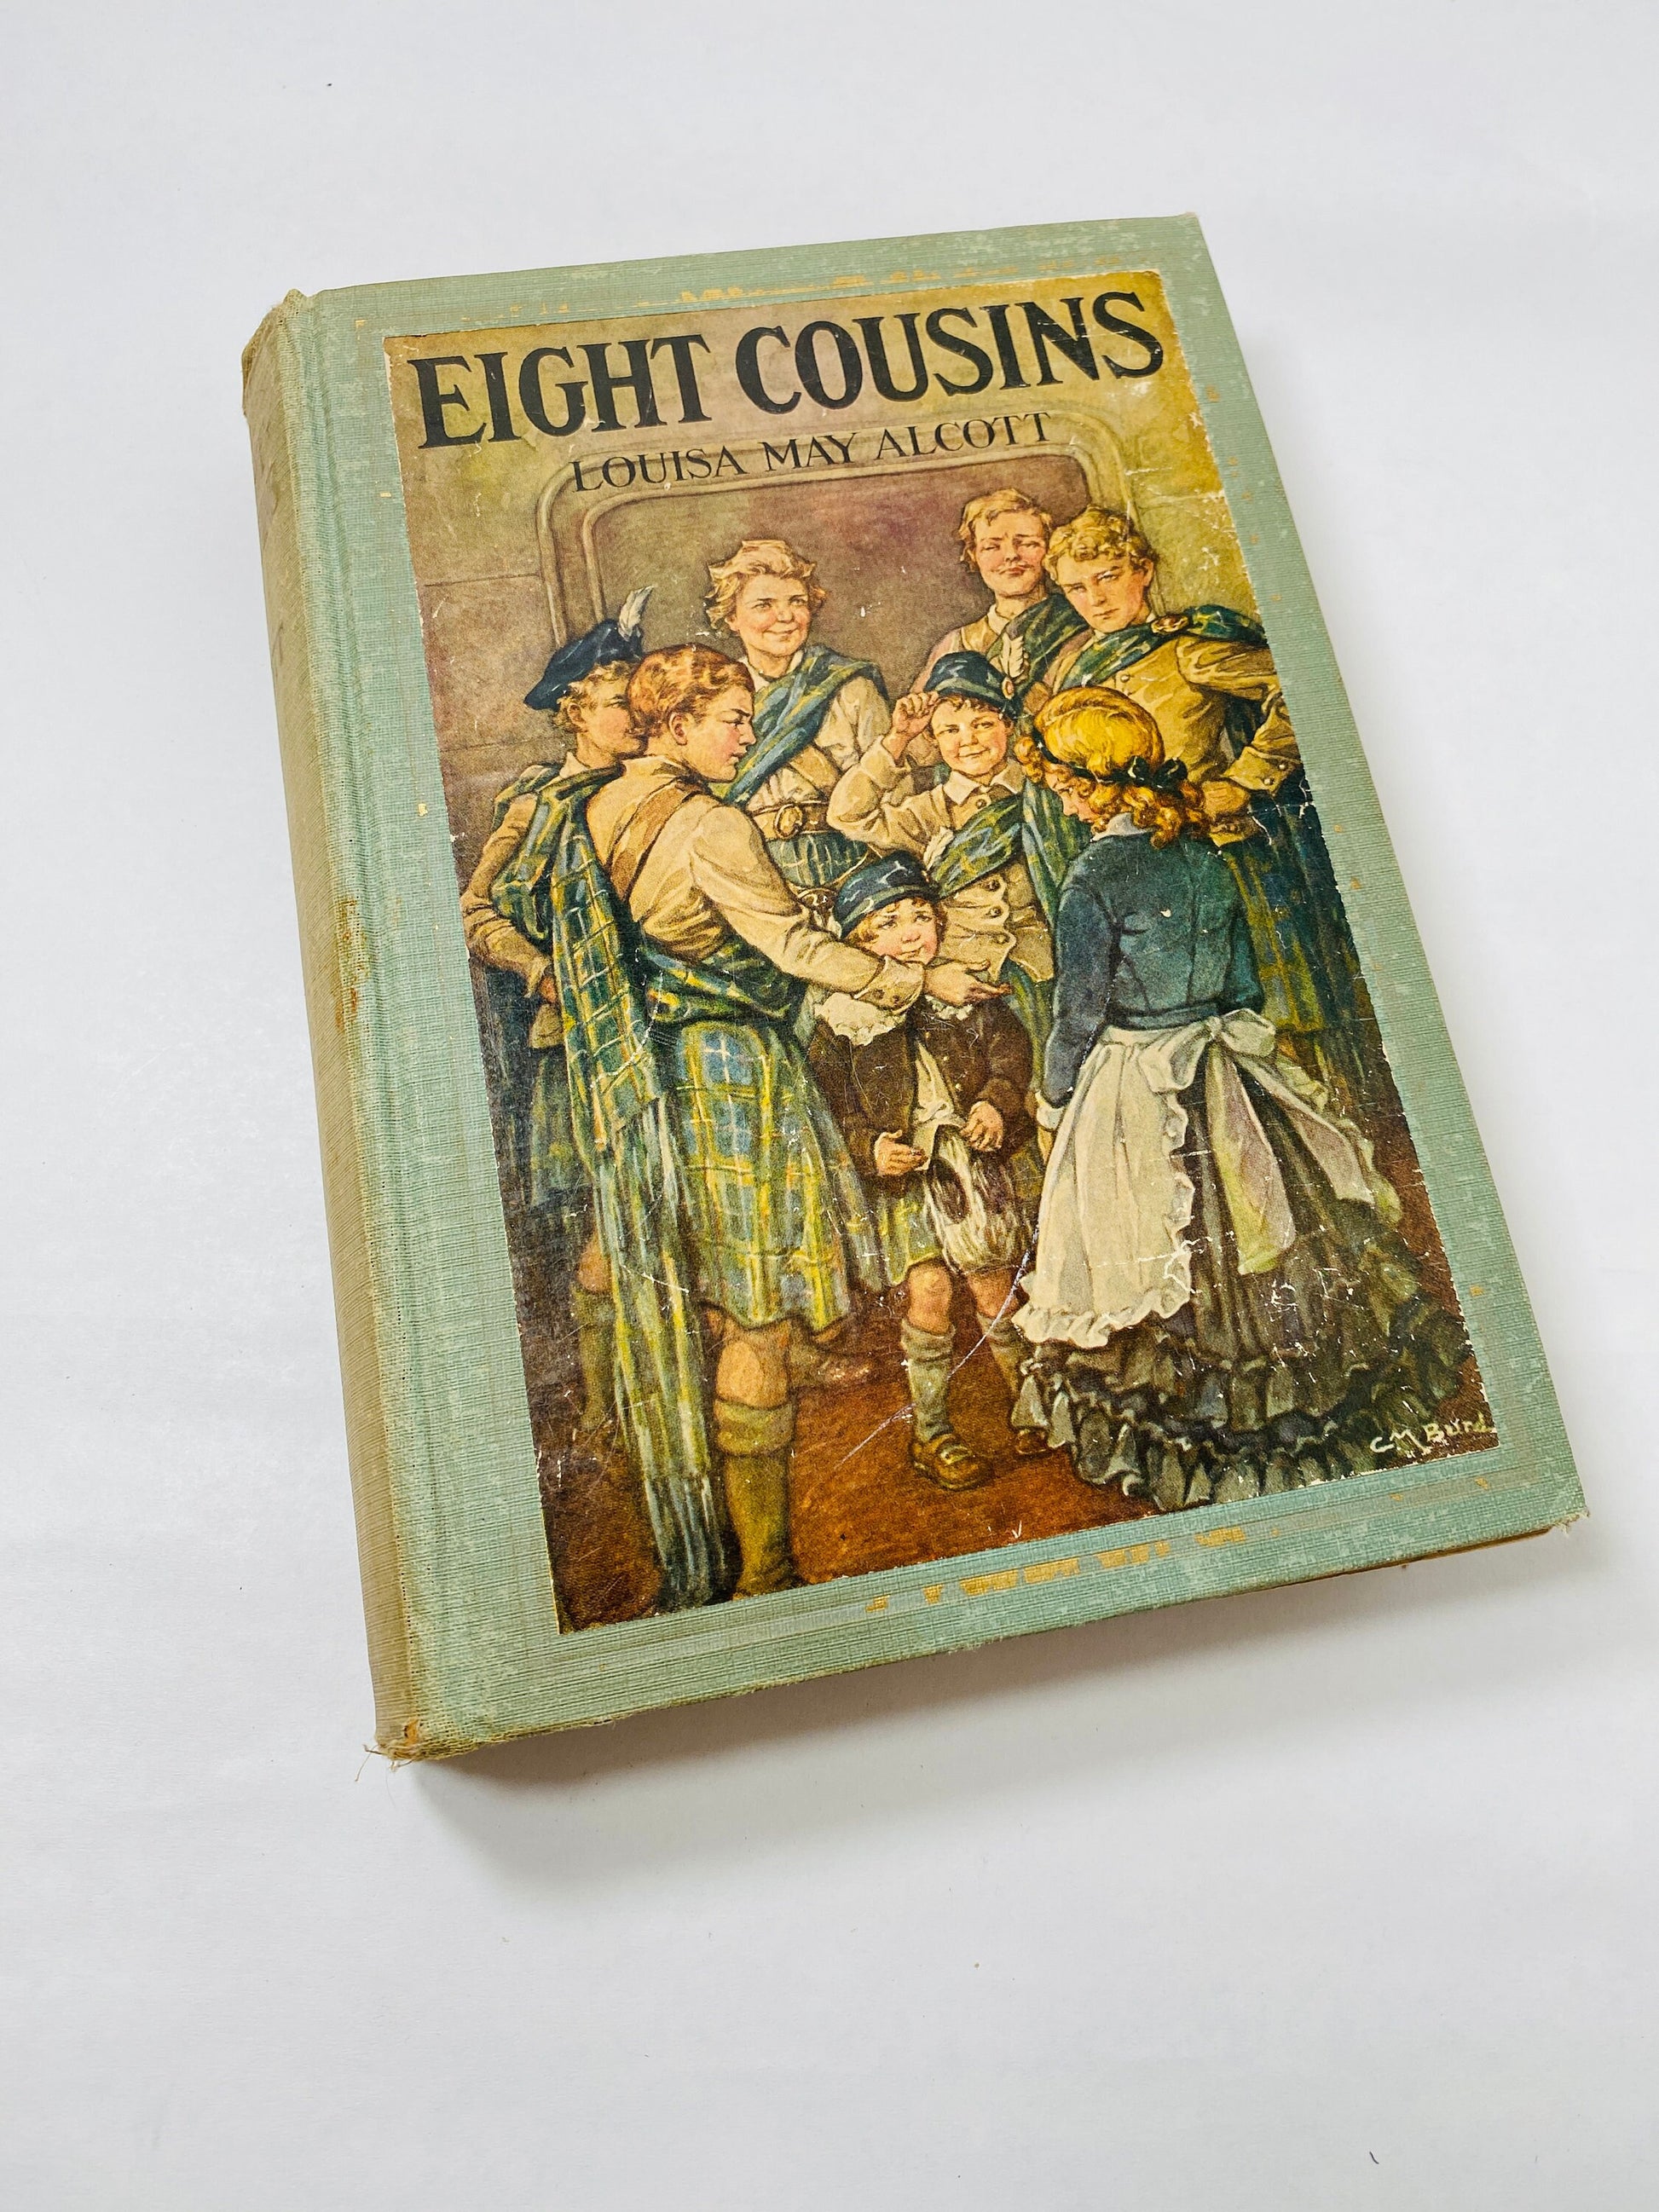 1931 Louisa May Alcott Eight Cousins John C. Wnston vintage hardback book by the author of Little Women Christmas gift